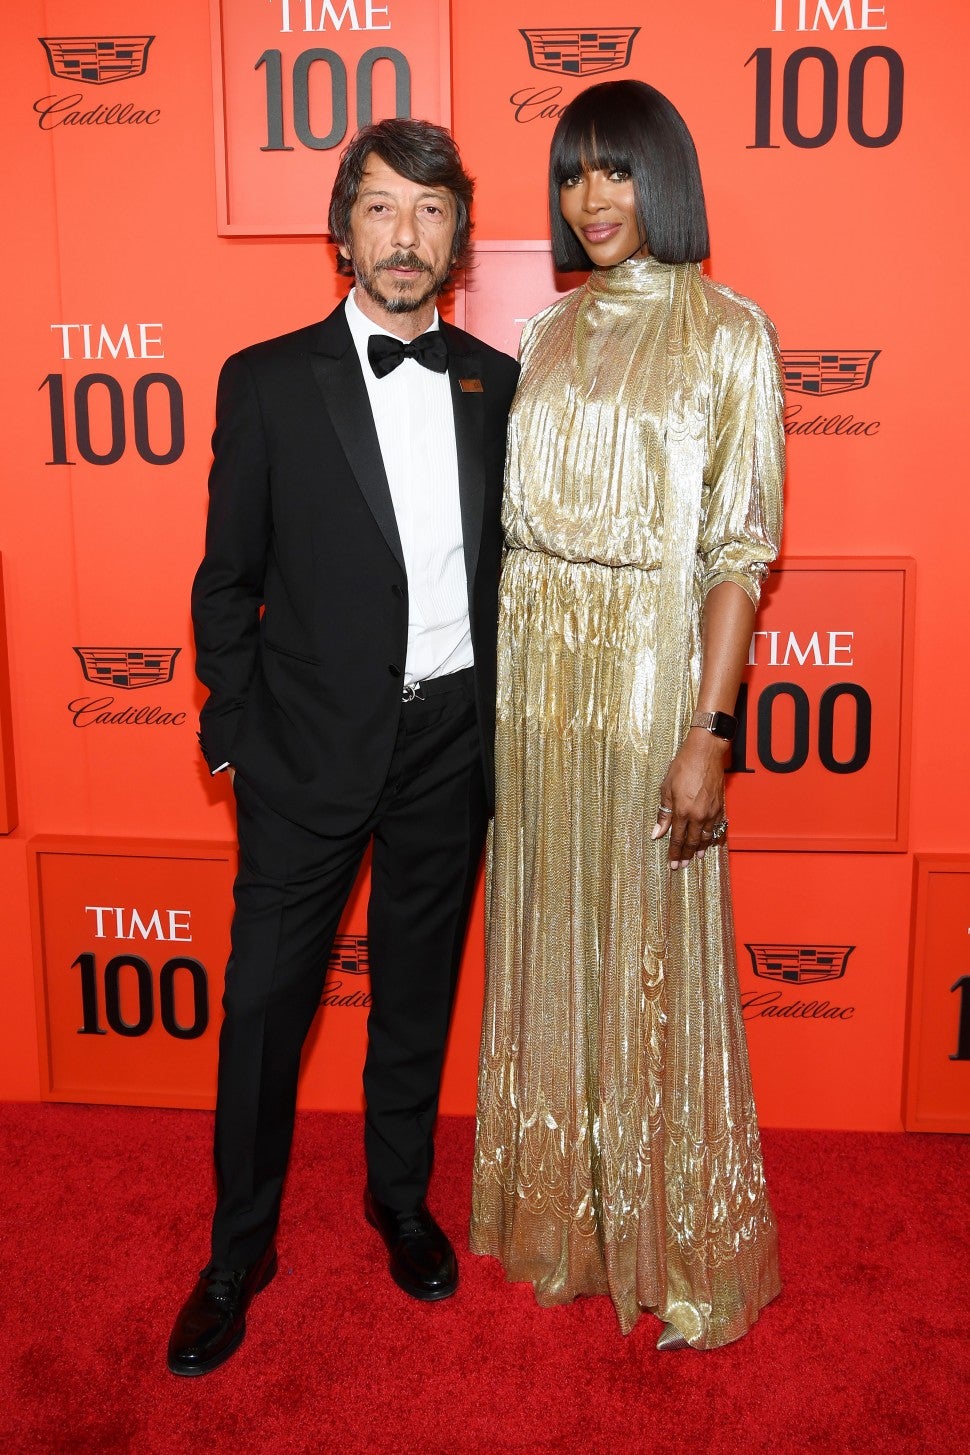 Pierpaolo Piccioli and Naomi Campbell Time 100 Gala